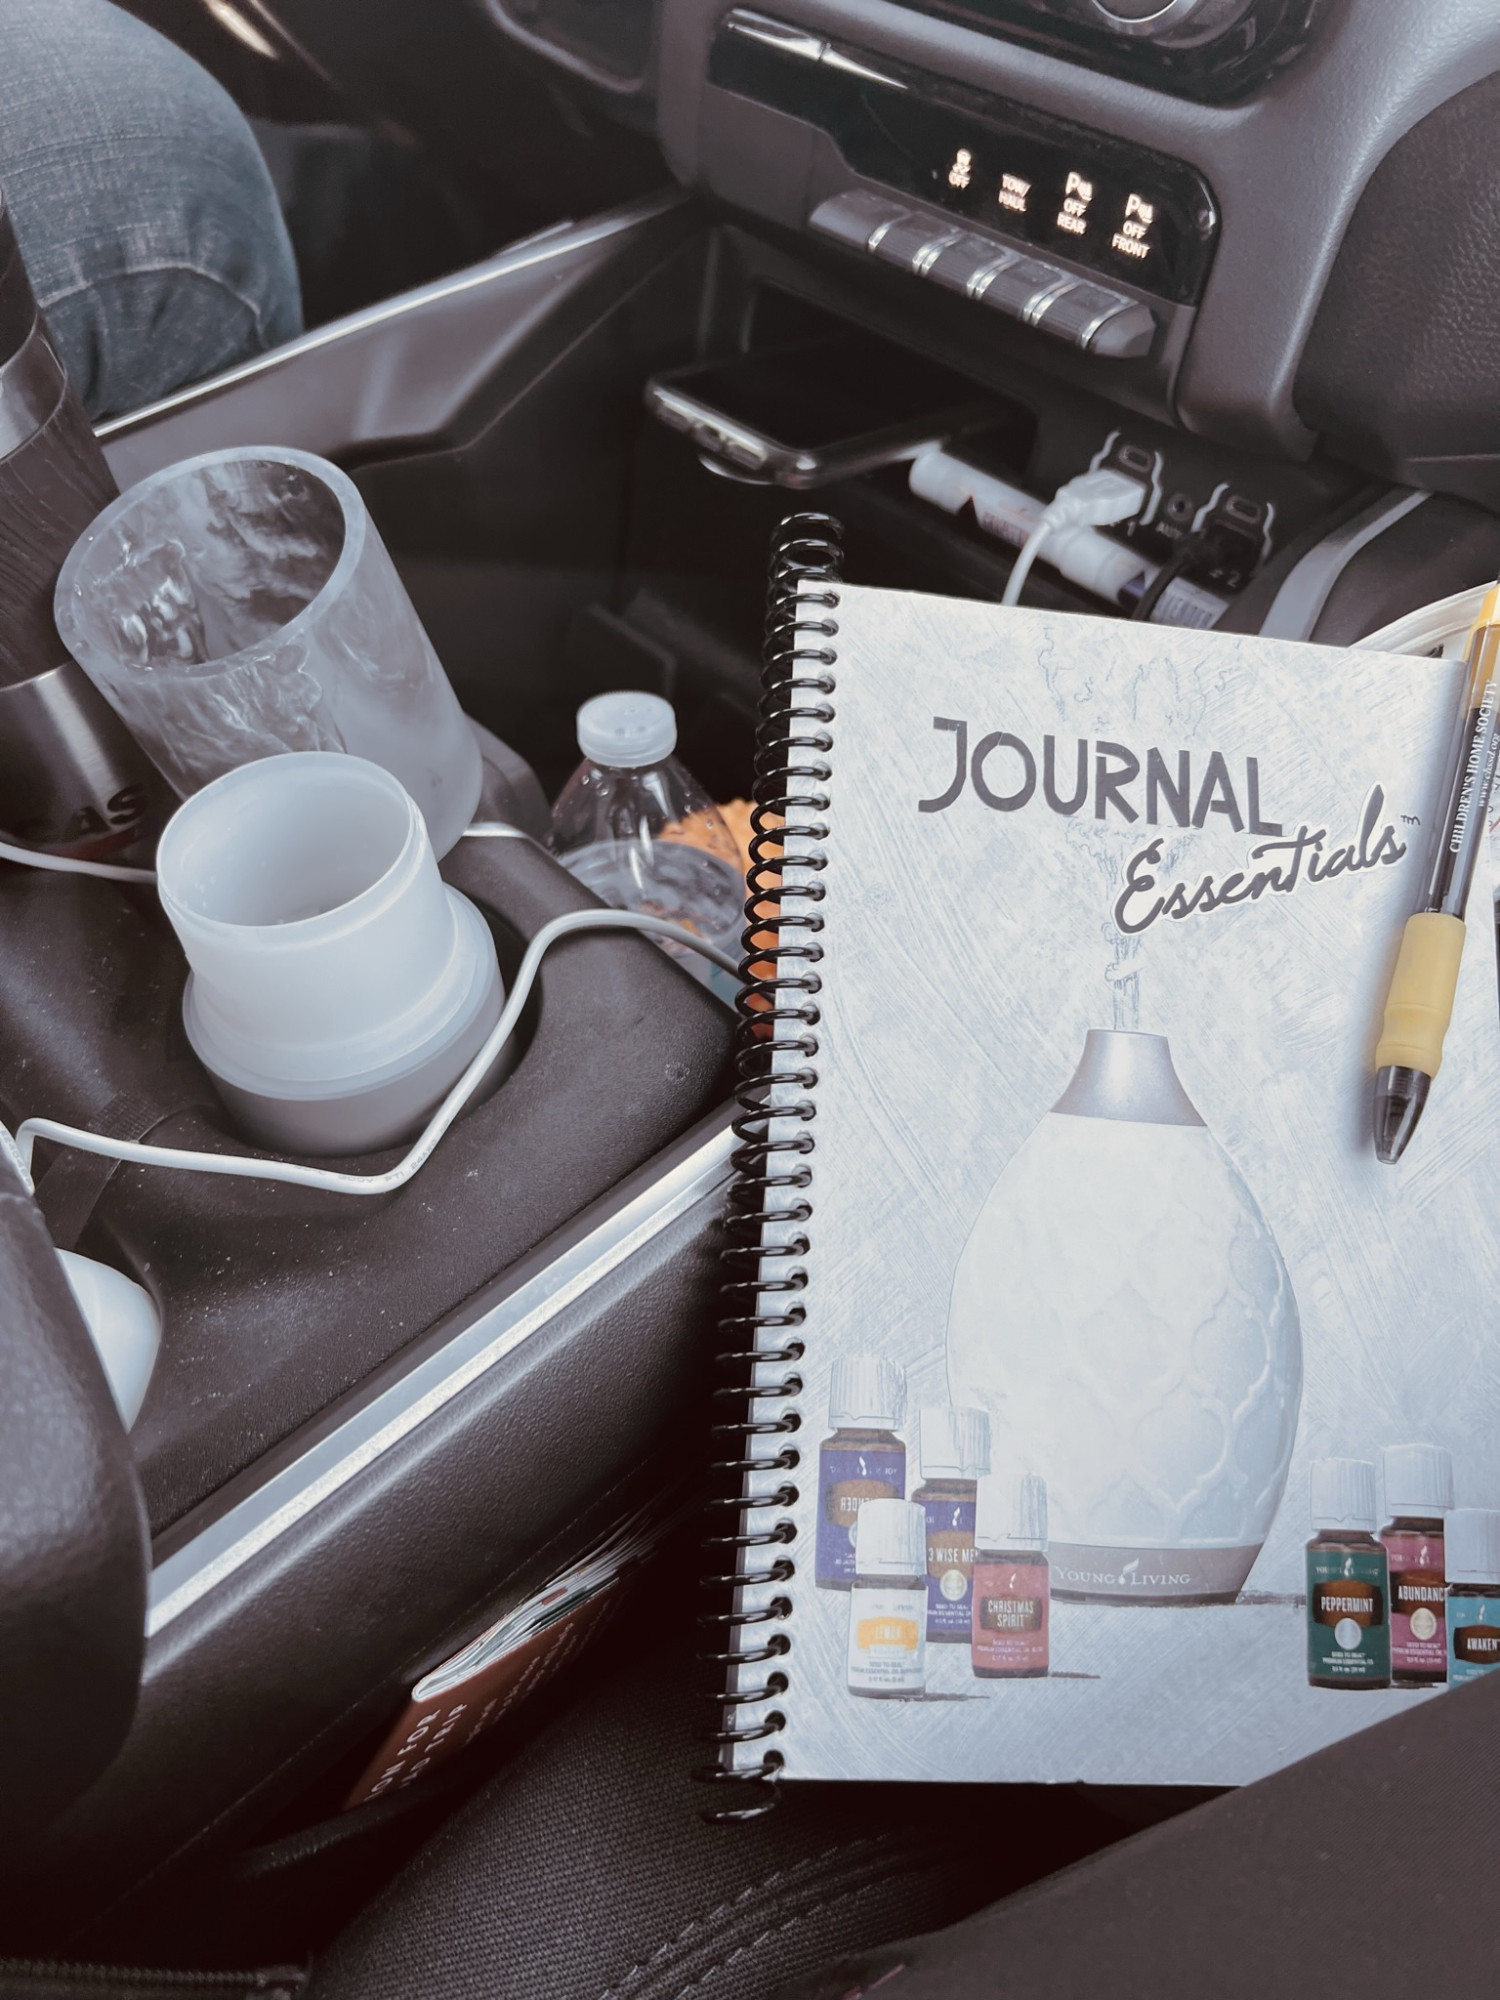 Truck diffuser and Journal Essentials journal ready to travel on our next adventure.